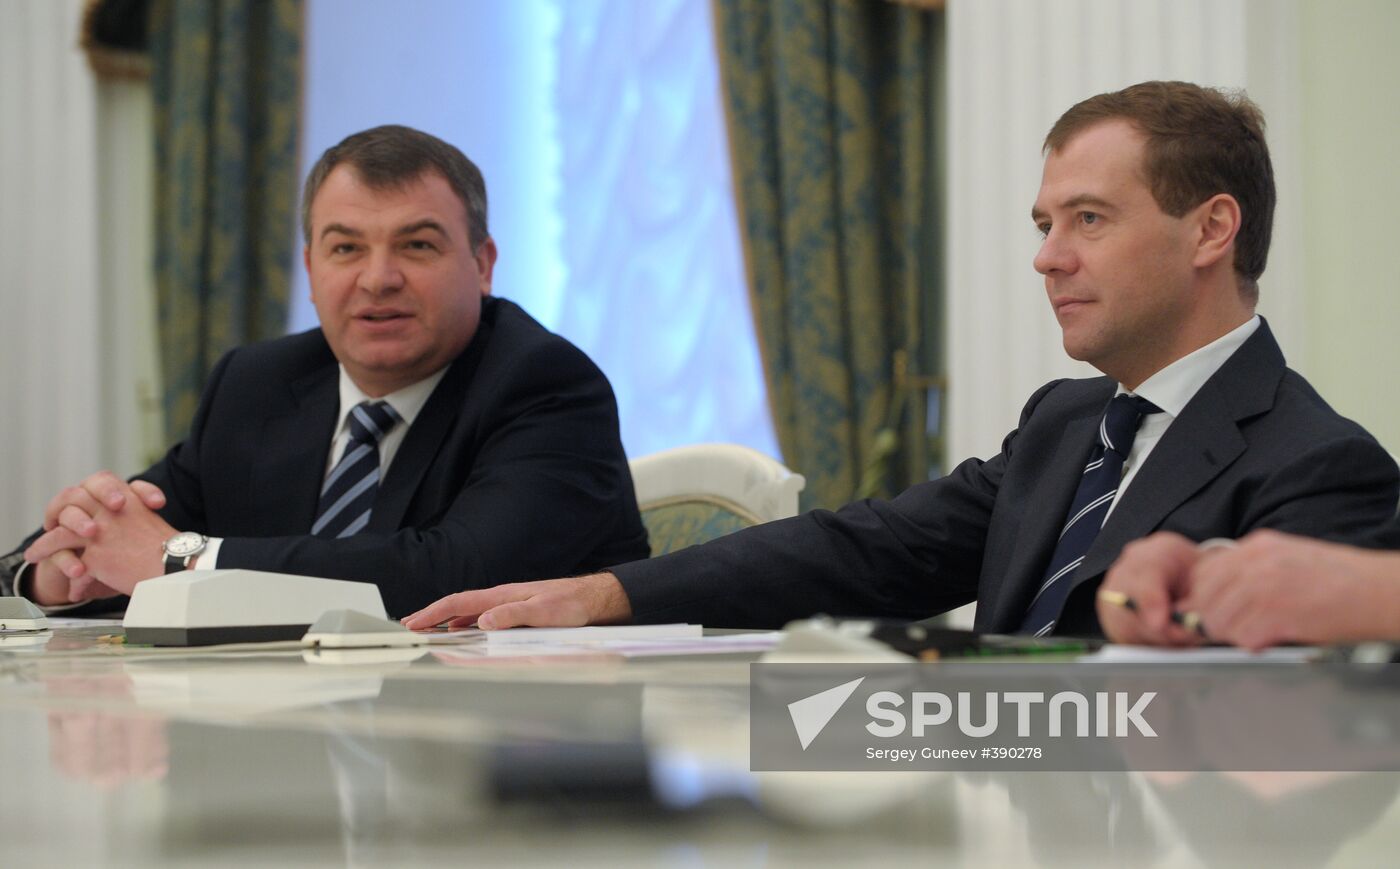 President Dmitry Medvedev meets with SCO defense ministers